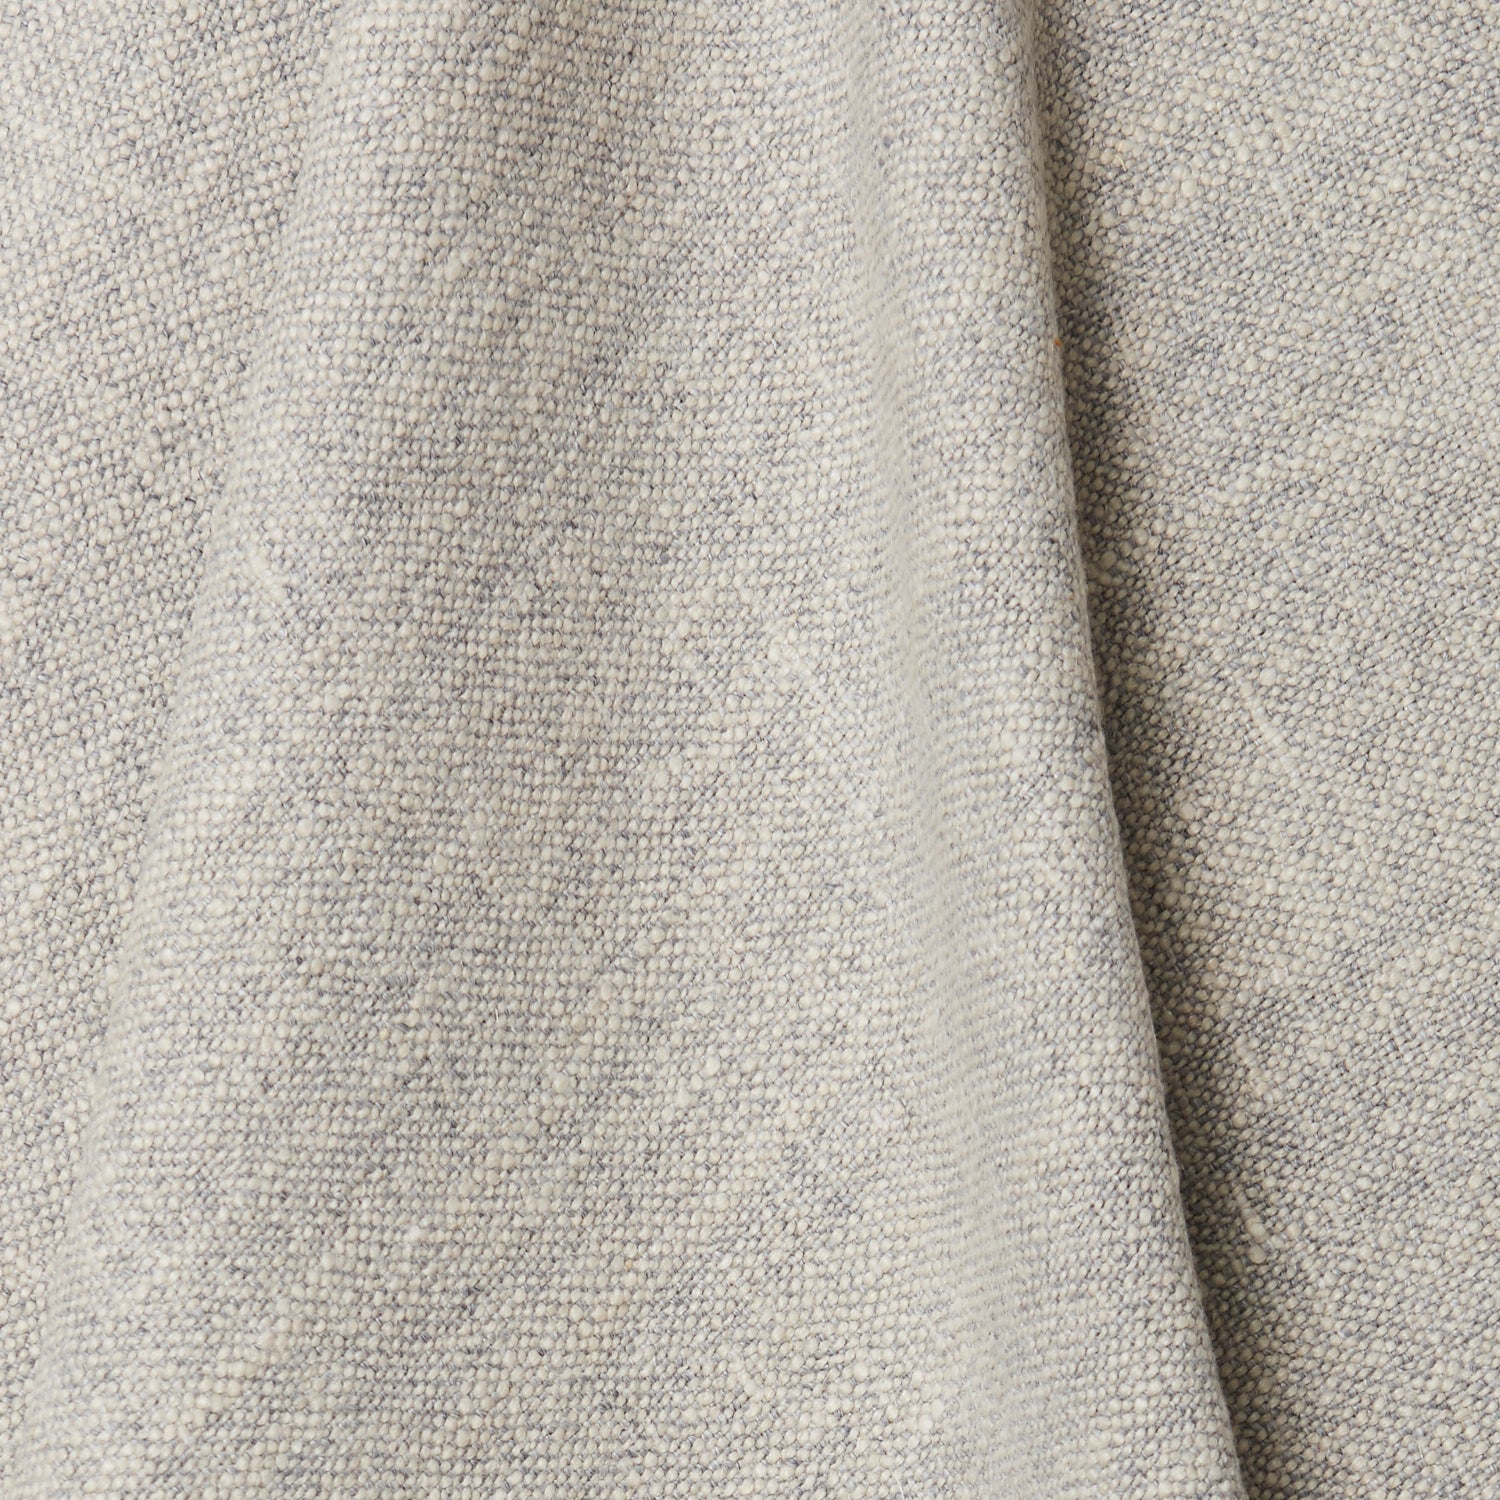 A rumpled swatch of blended linen fabric in a mottled light gray color.